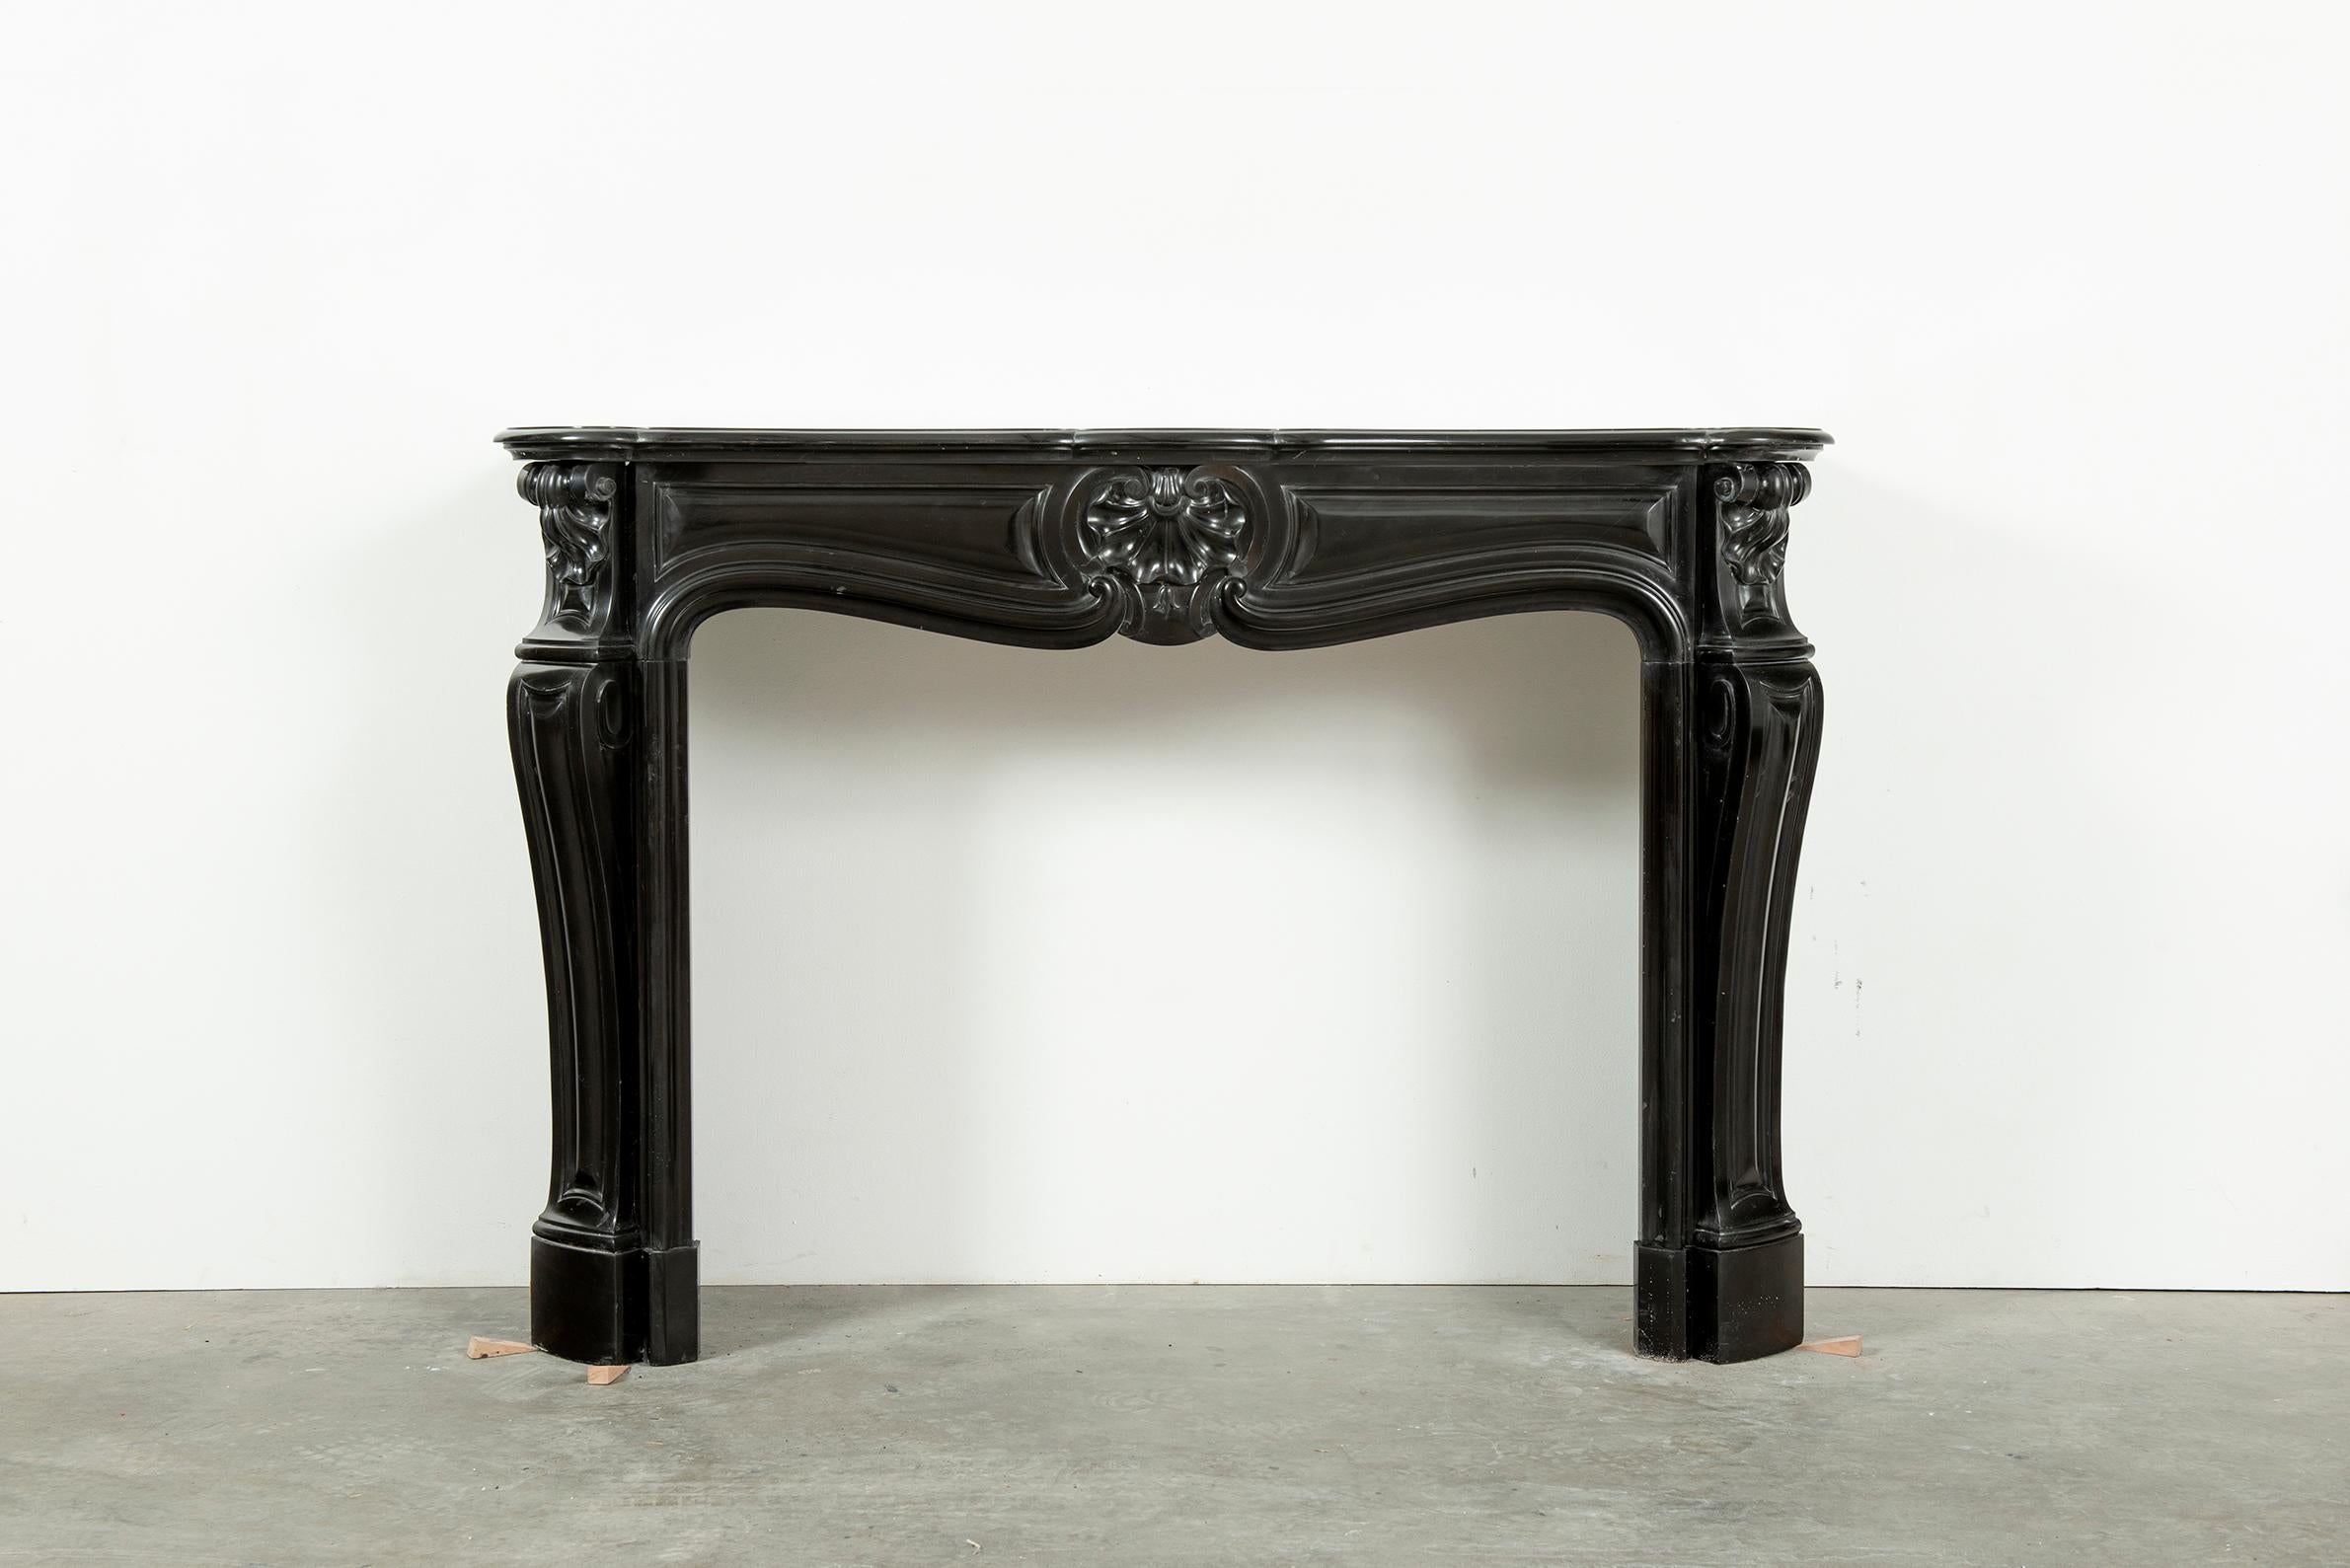 Black Marble Louis XV Fireplace Mantel, 19th Century

Beautiful decorative piece, nice proportioned with serpentine breakfront shelf above a fielded freeze centered by a lovely central scallop echoed in the beautiful endblocks which sit above